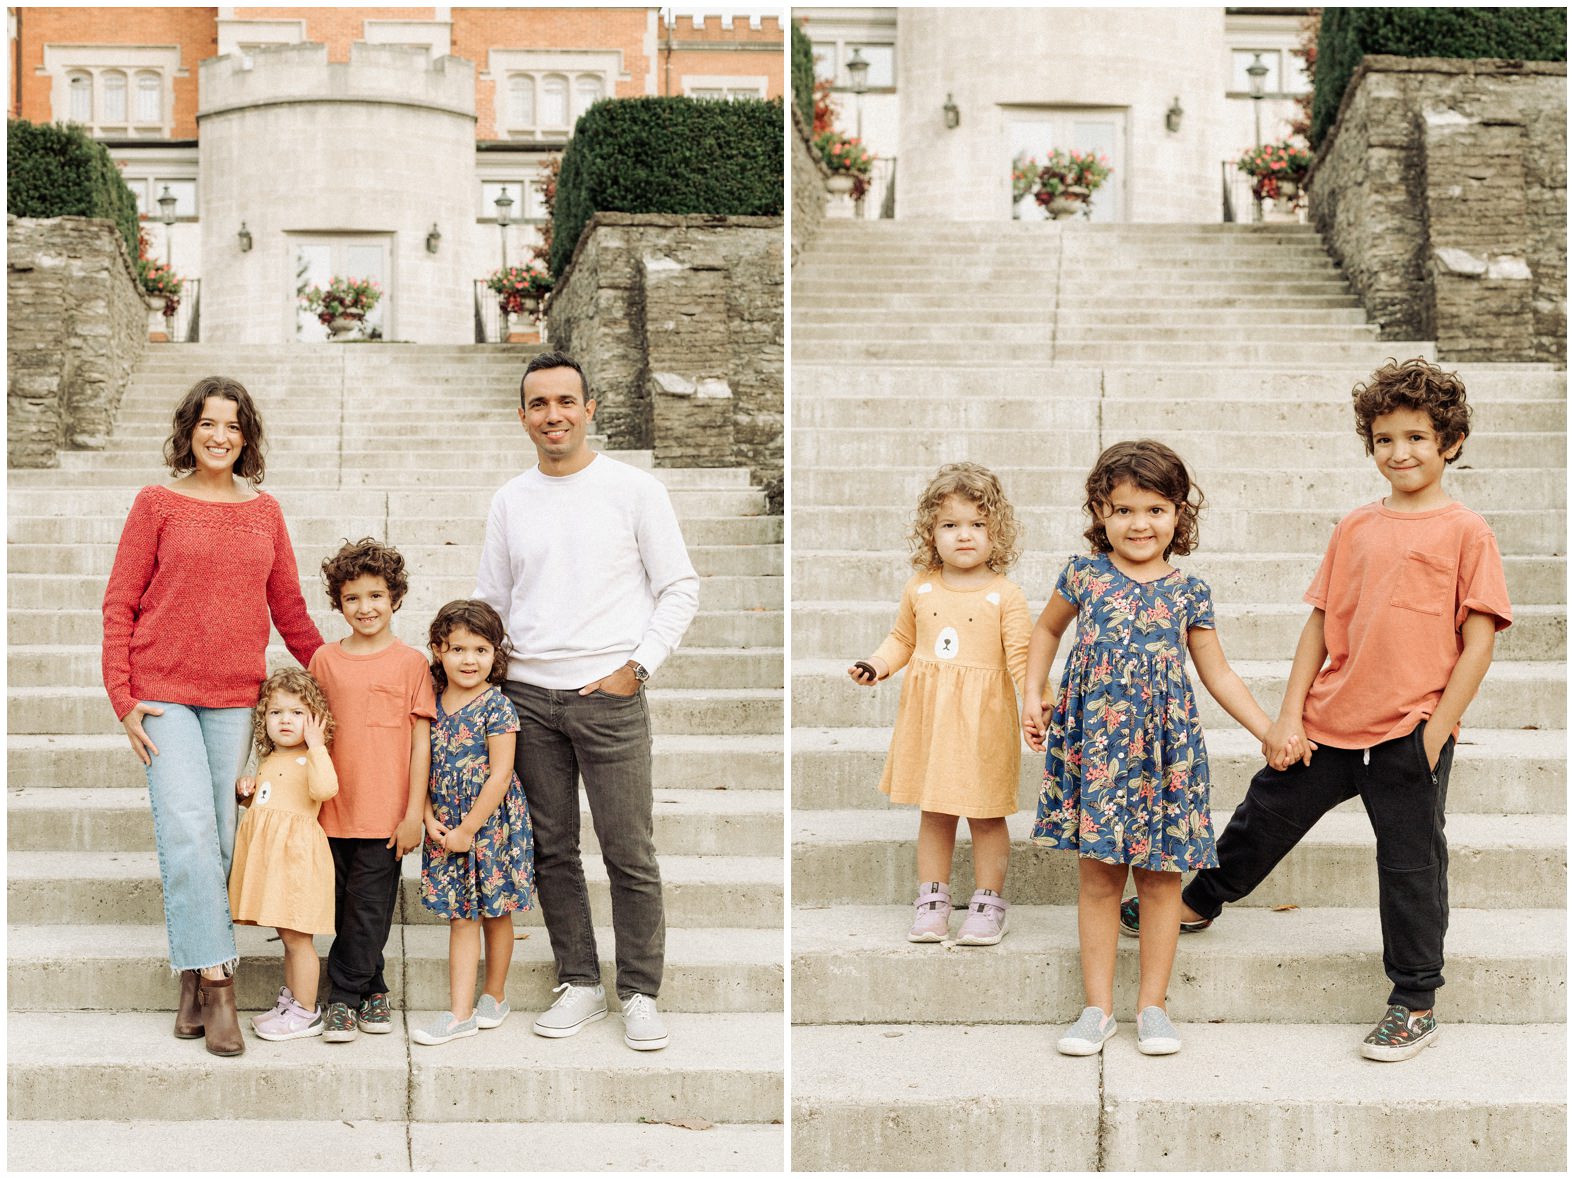 Adam Lowe photography, family session, outdoor, love, kids, jeffery mansion, fine art, editorial